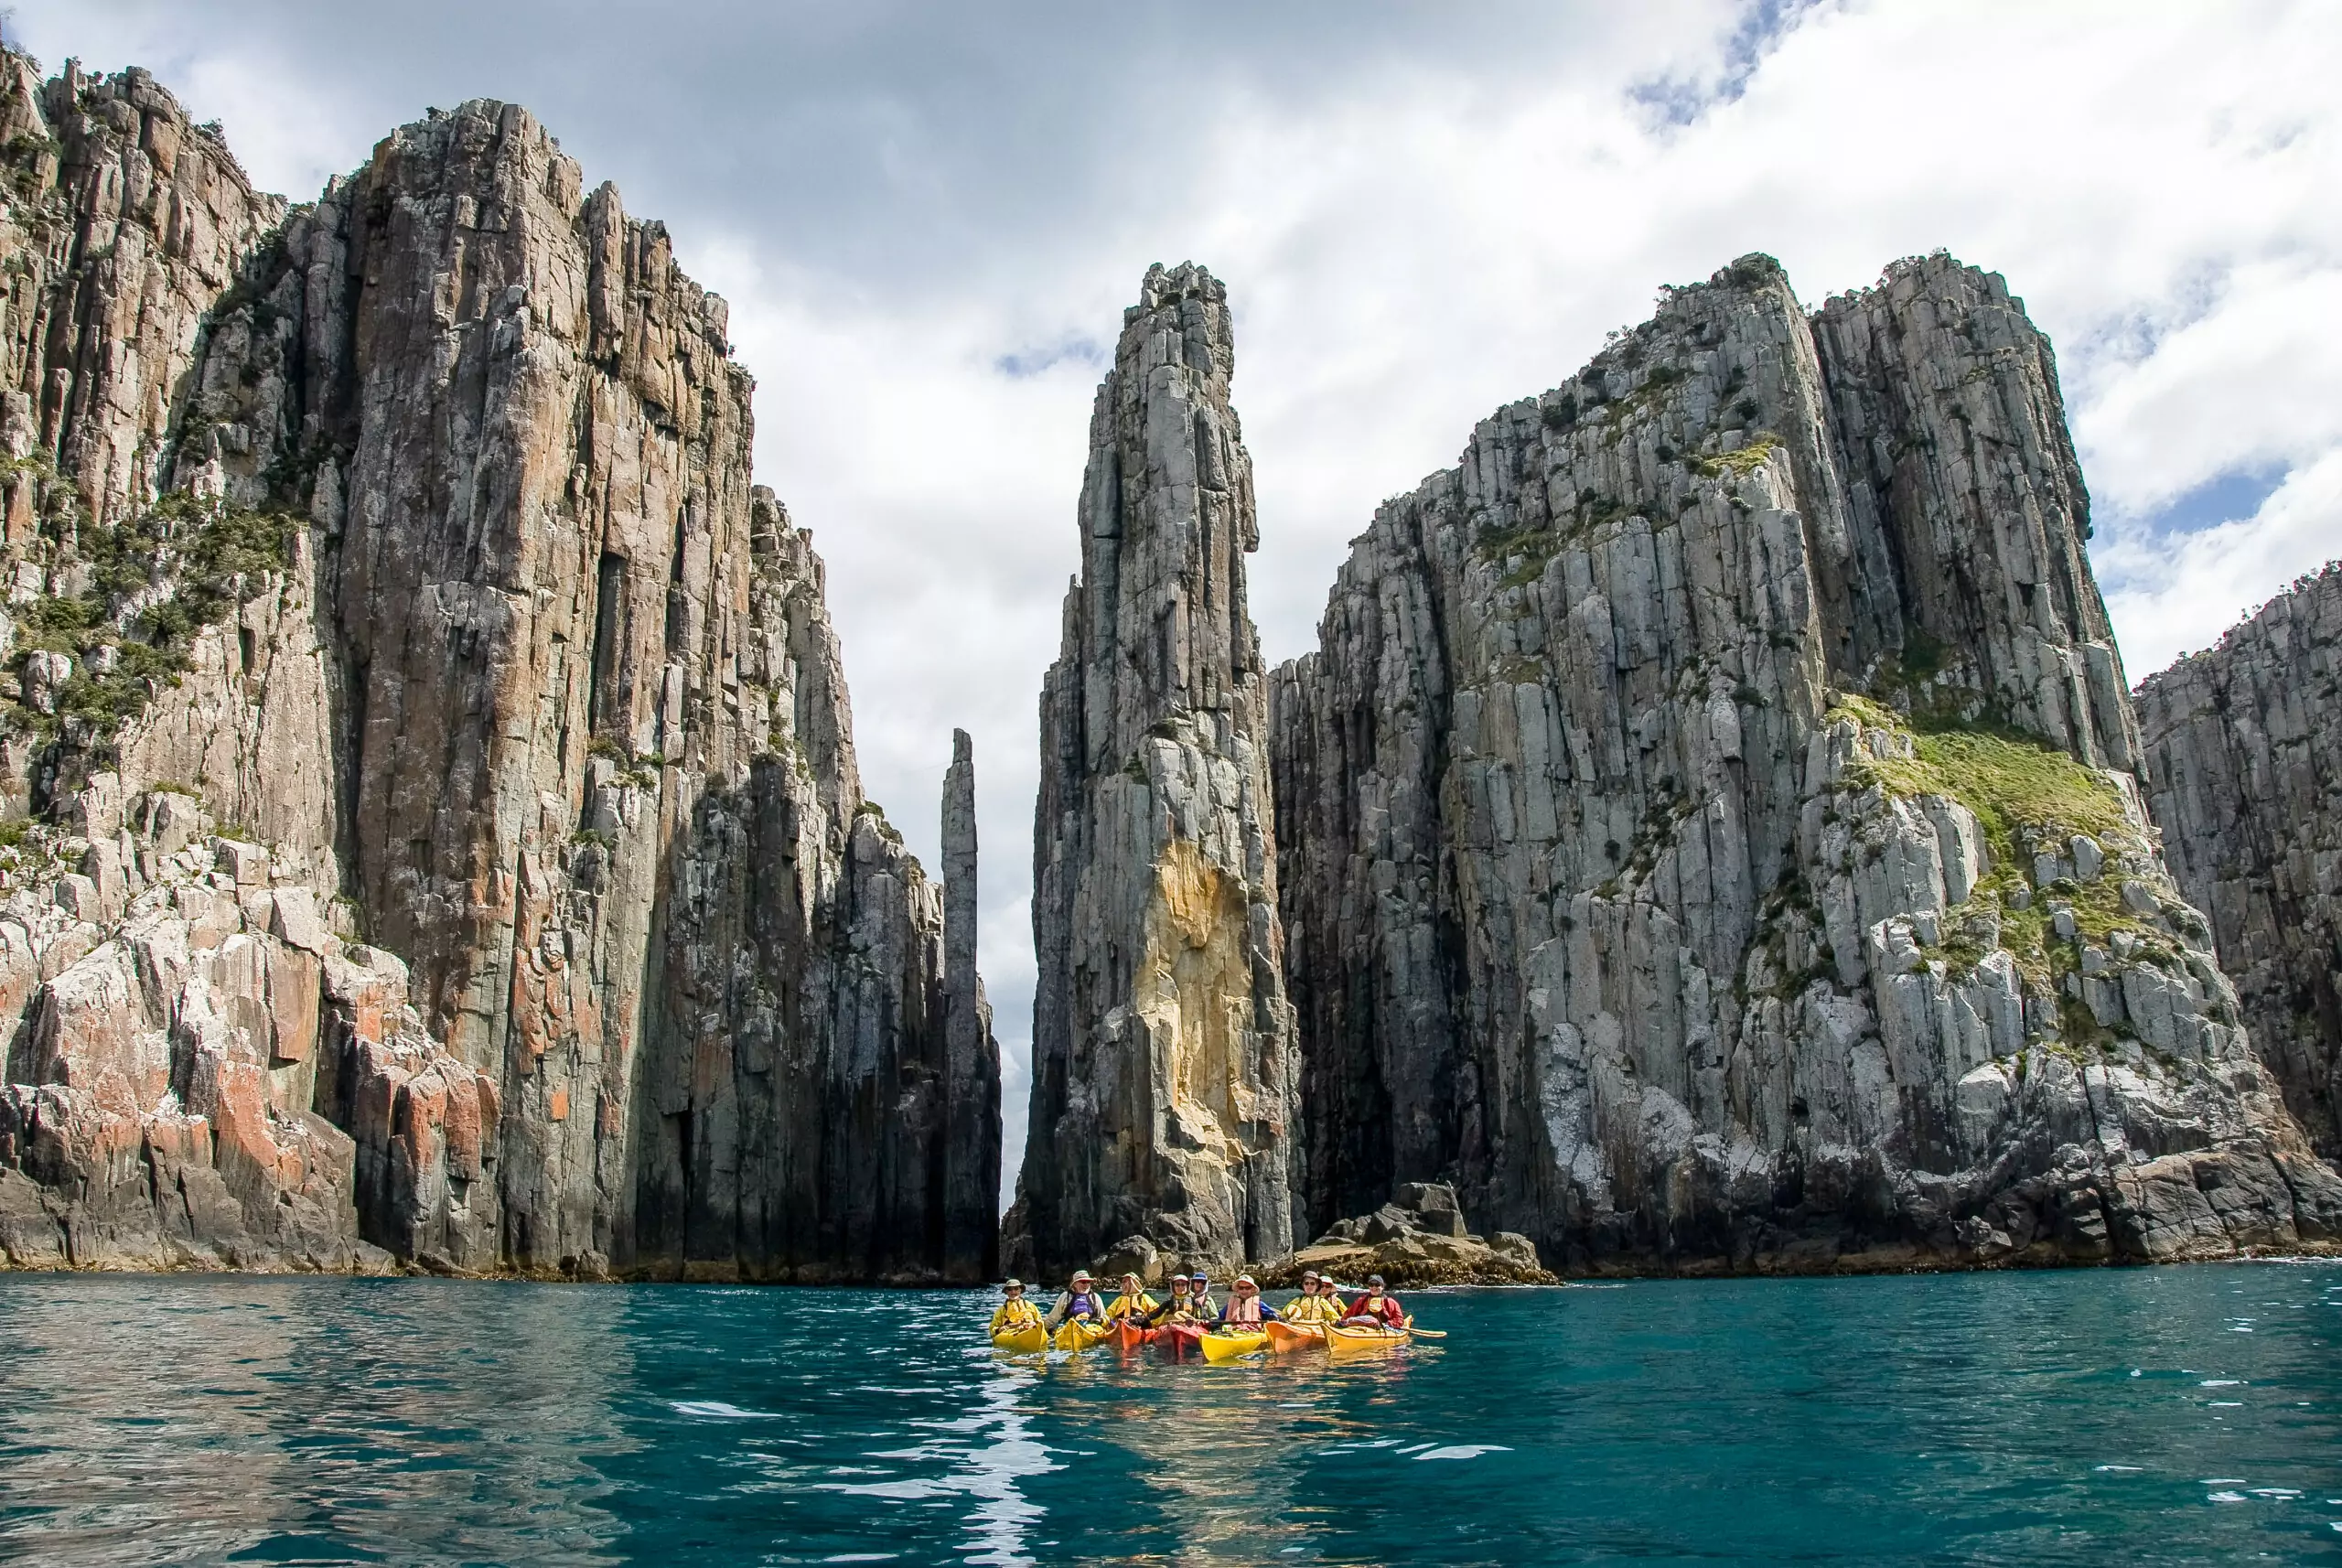 group of kayakers near incredible rock formation